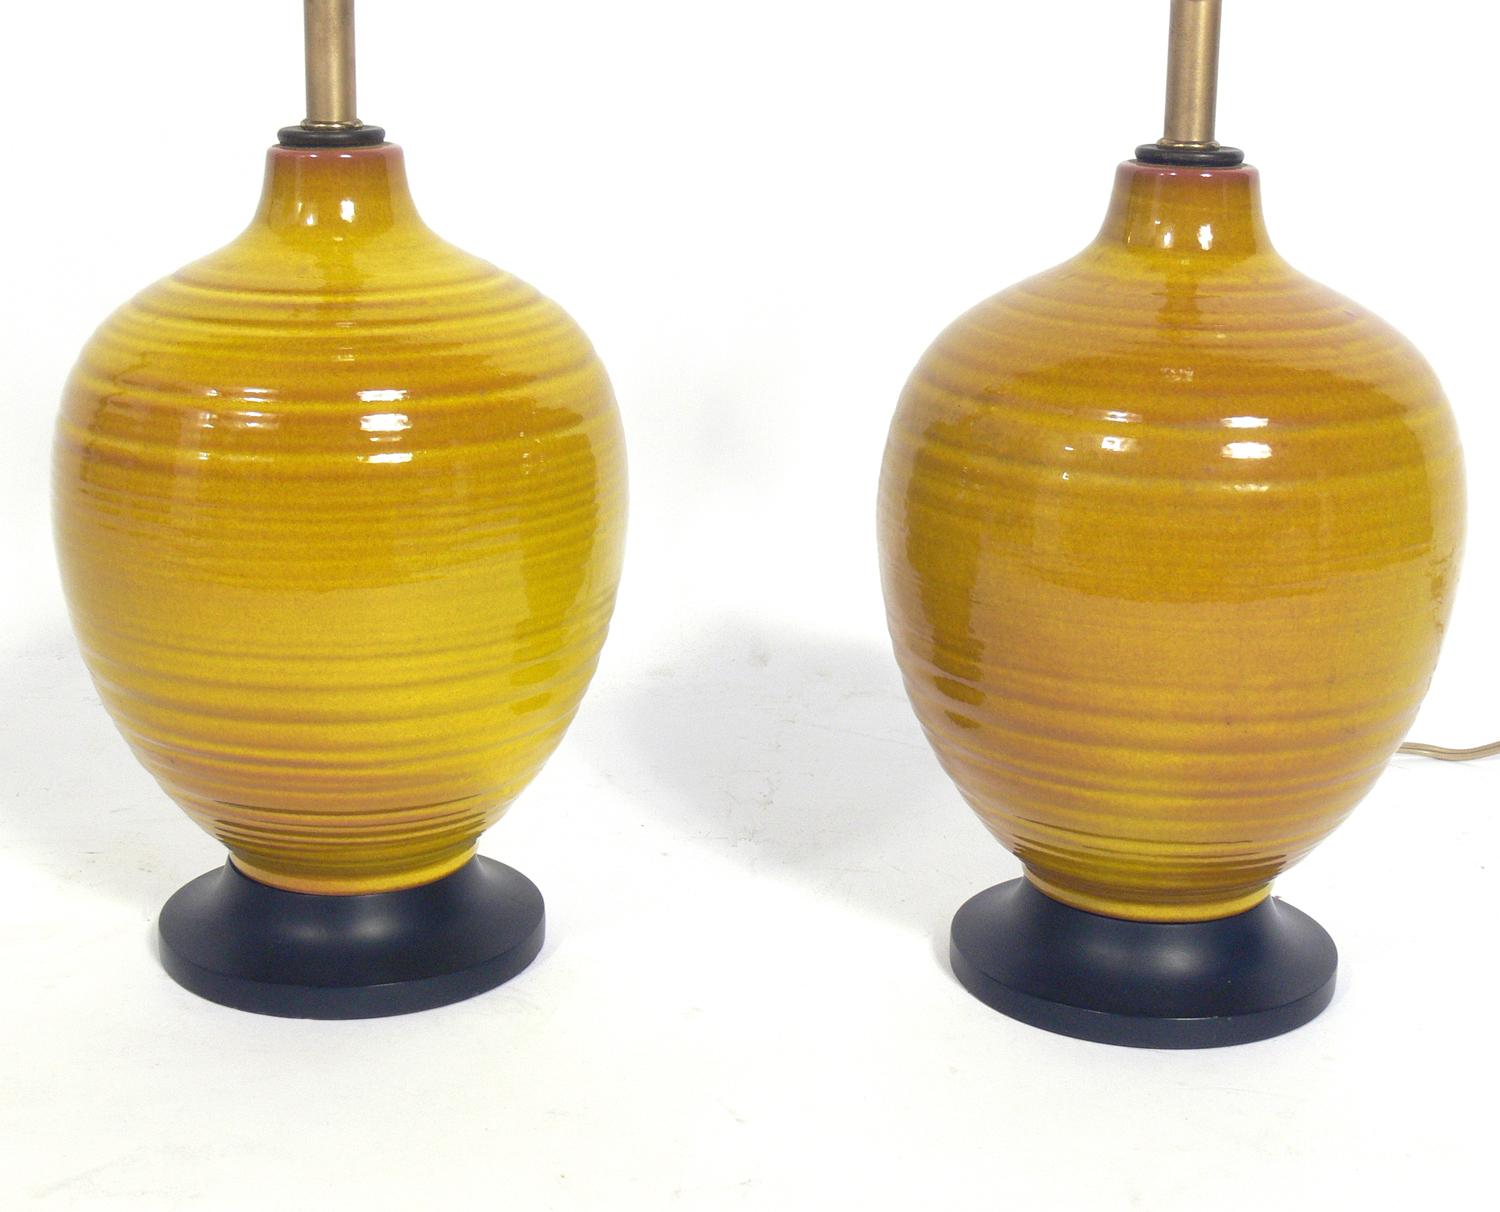 Pair of Petite yellow ceramic lamps, probably Chinese, circa 1970s. Vibrant yellow color. The price noted below includes the shades. Rewired and ready to use.